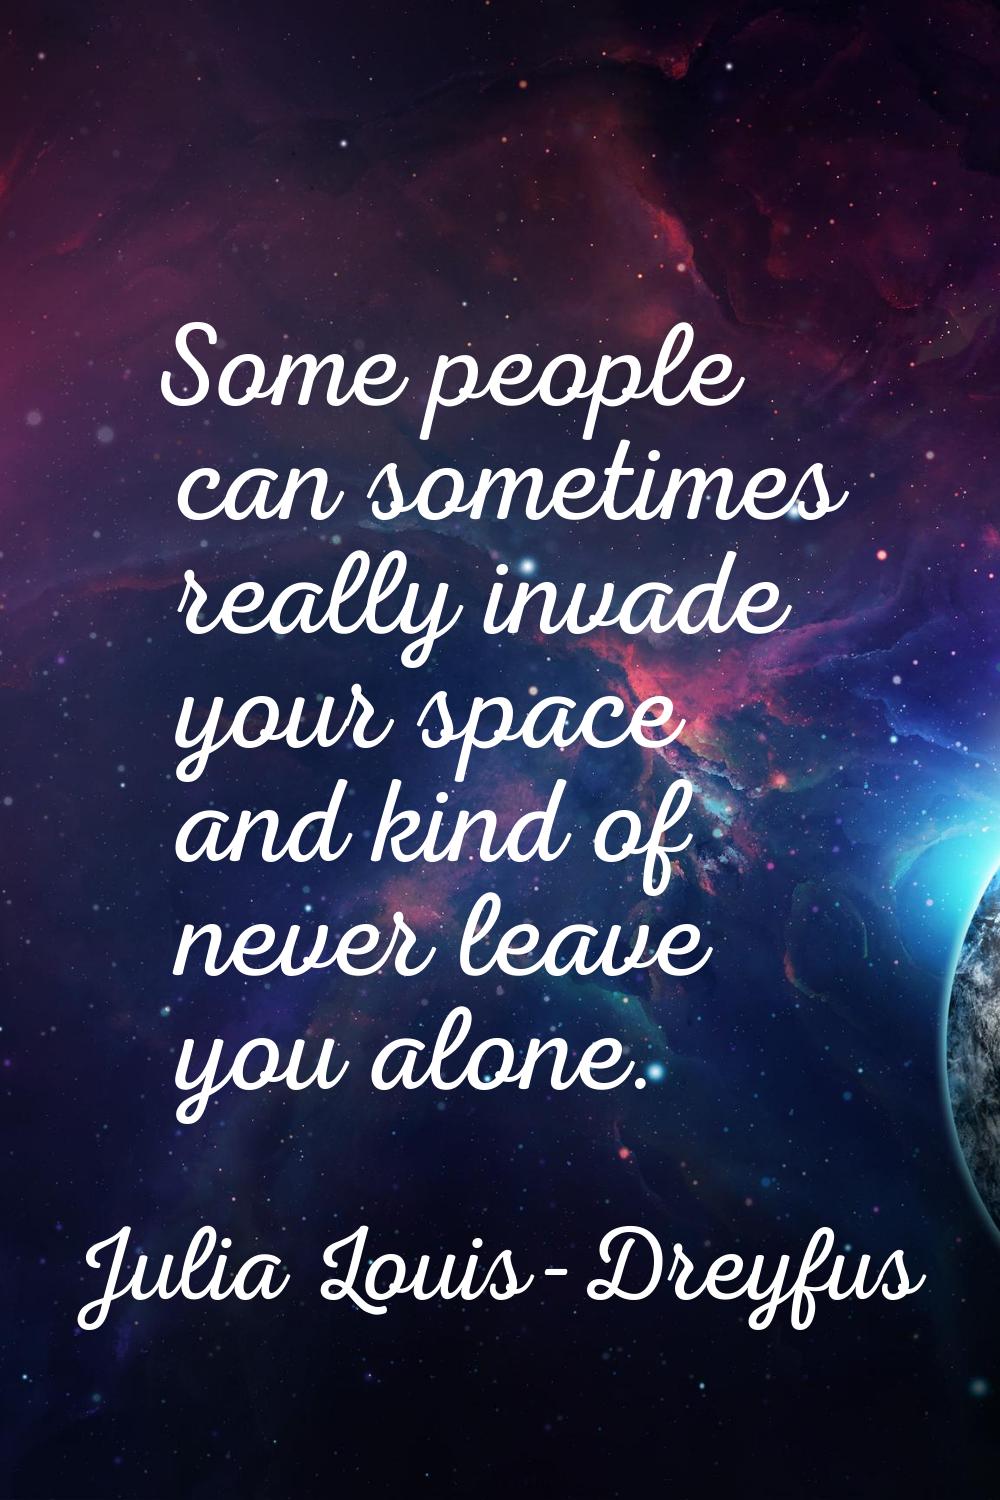 Some people can sometimes really invade your space and kind of never leave you alone.